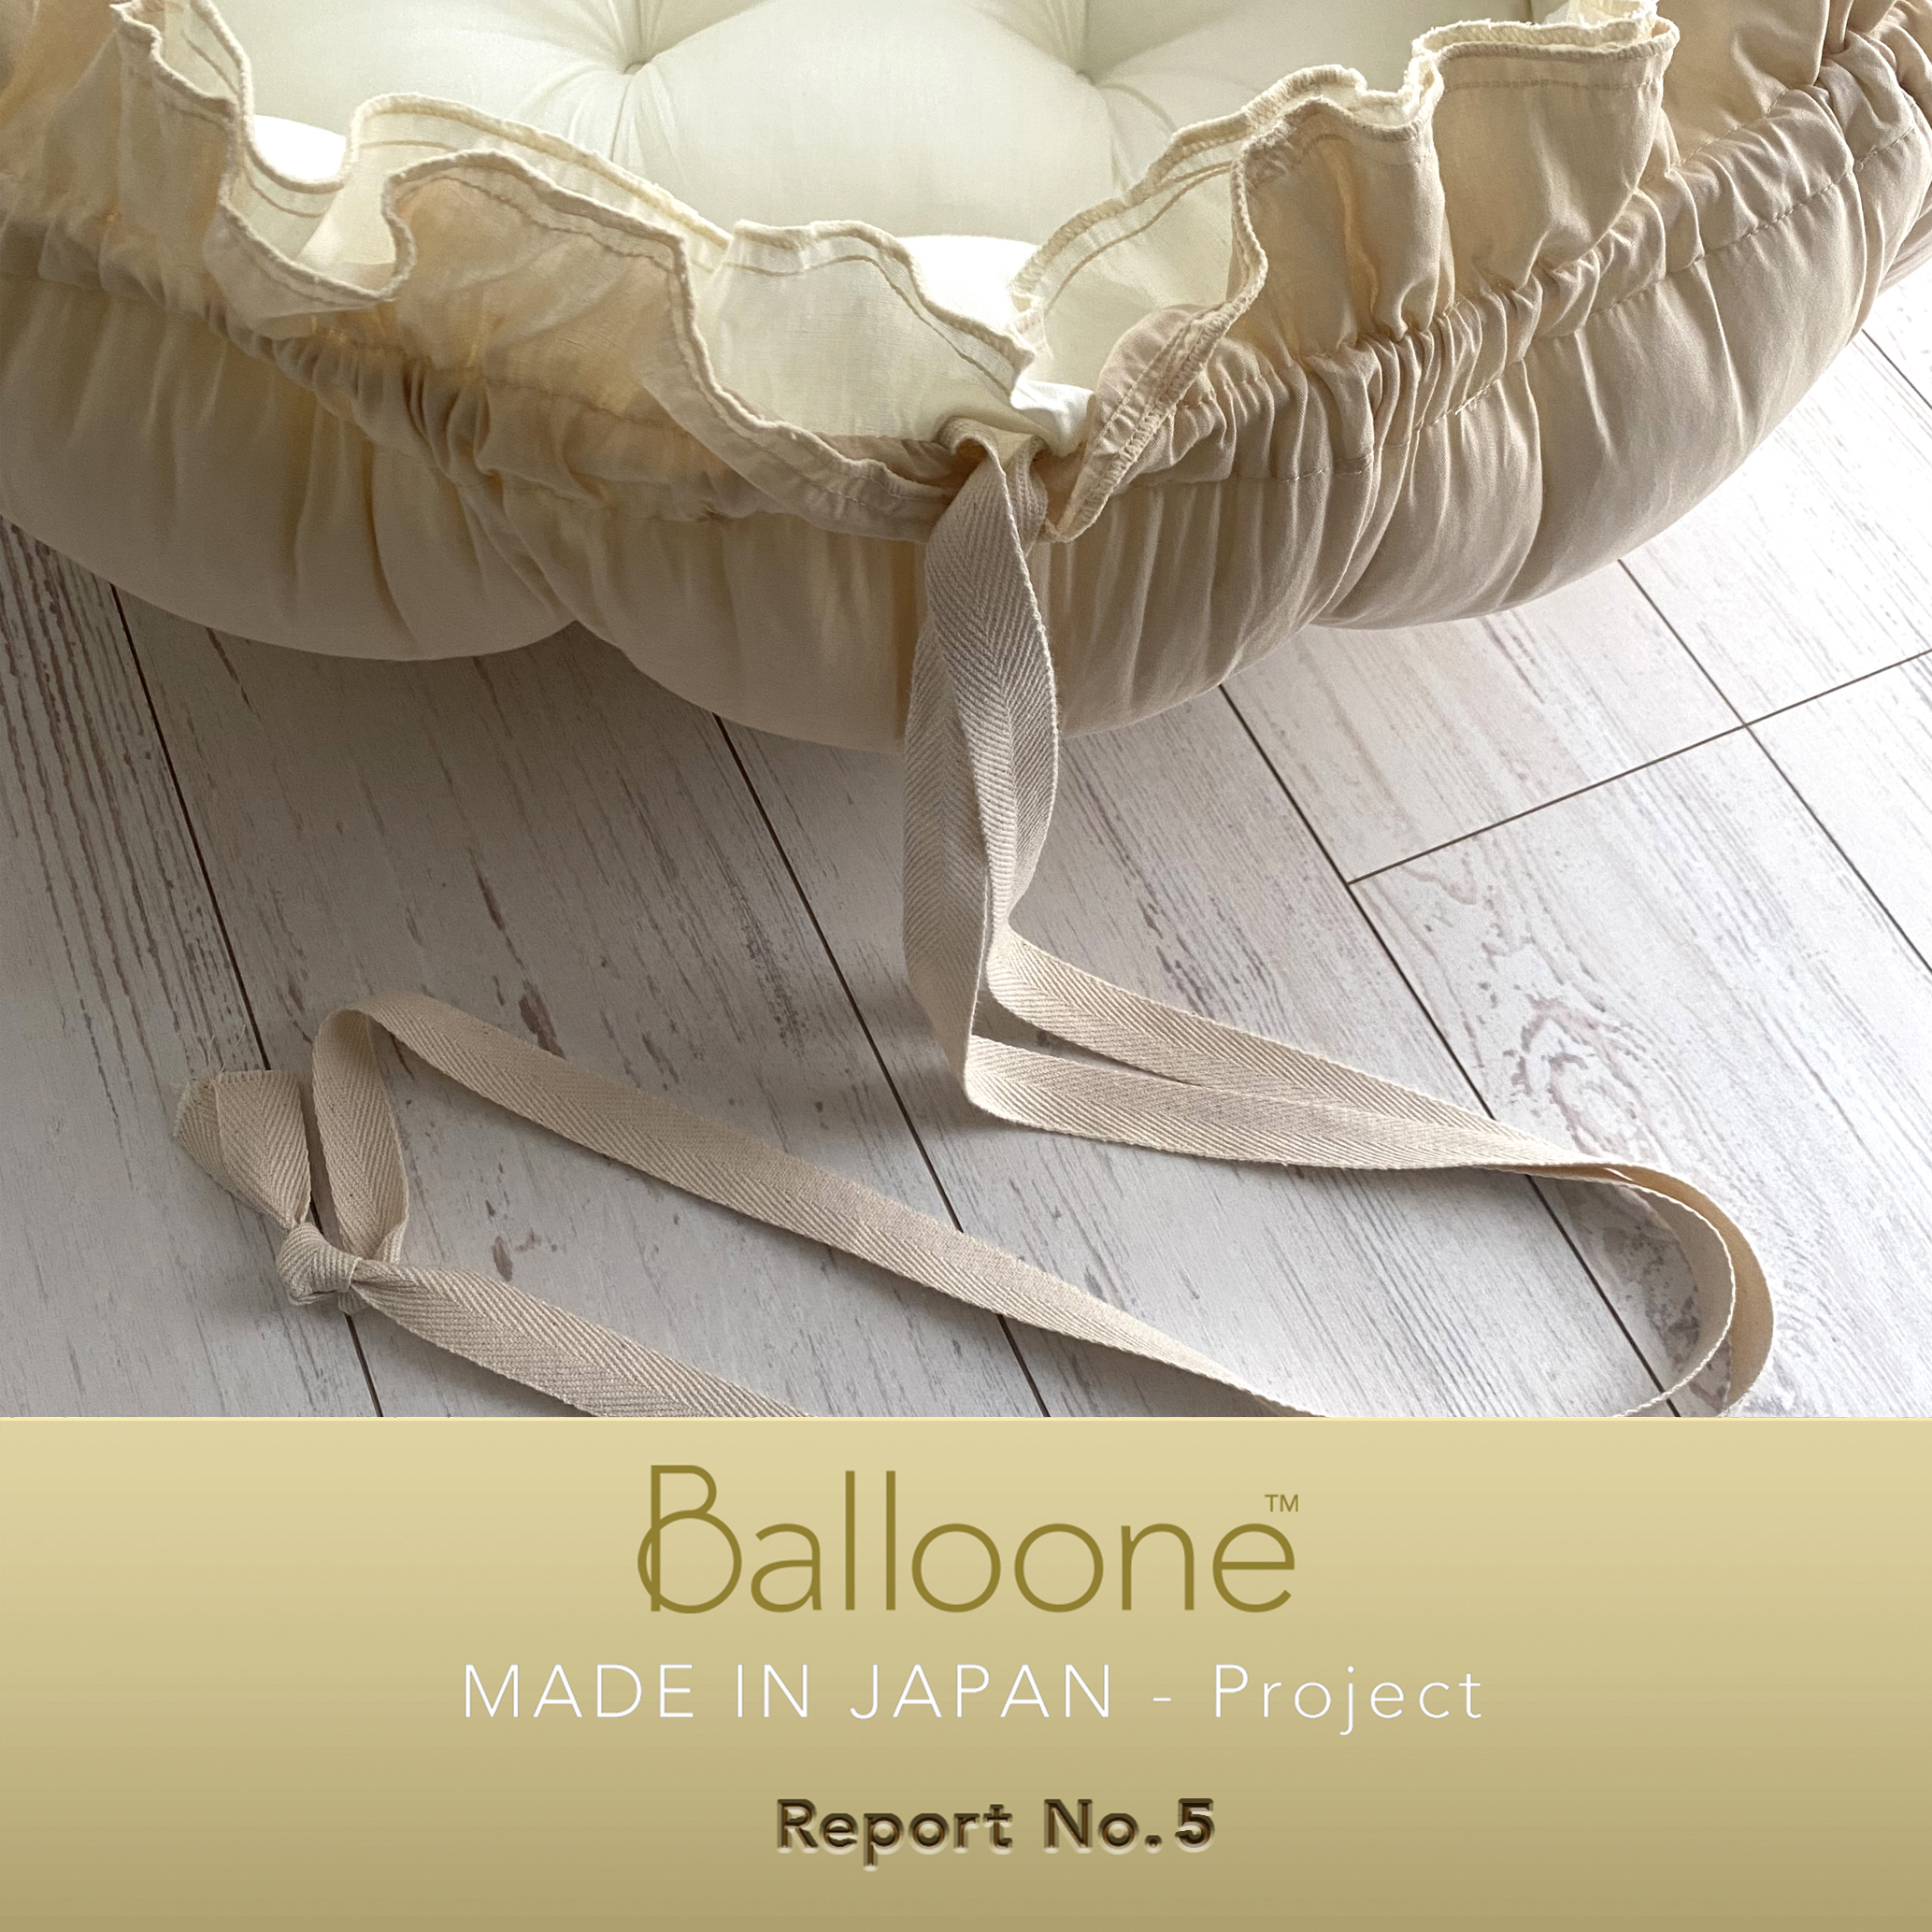 【Balloone／Made in Japan プロジェクト】リポート No.5